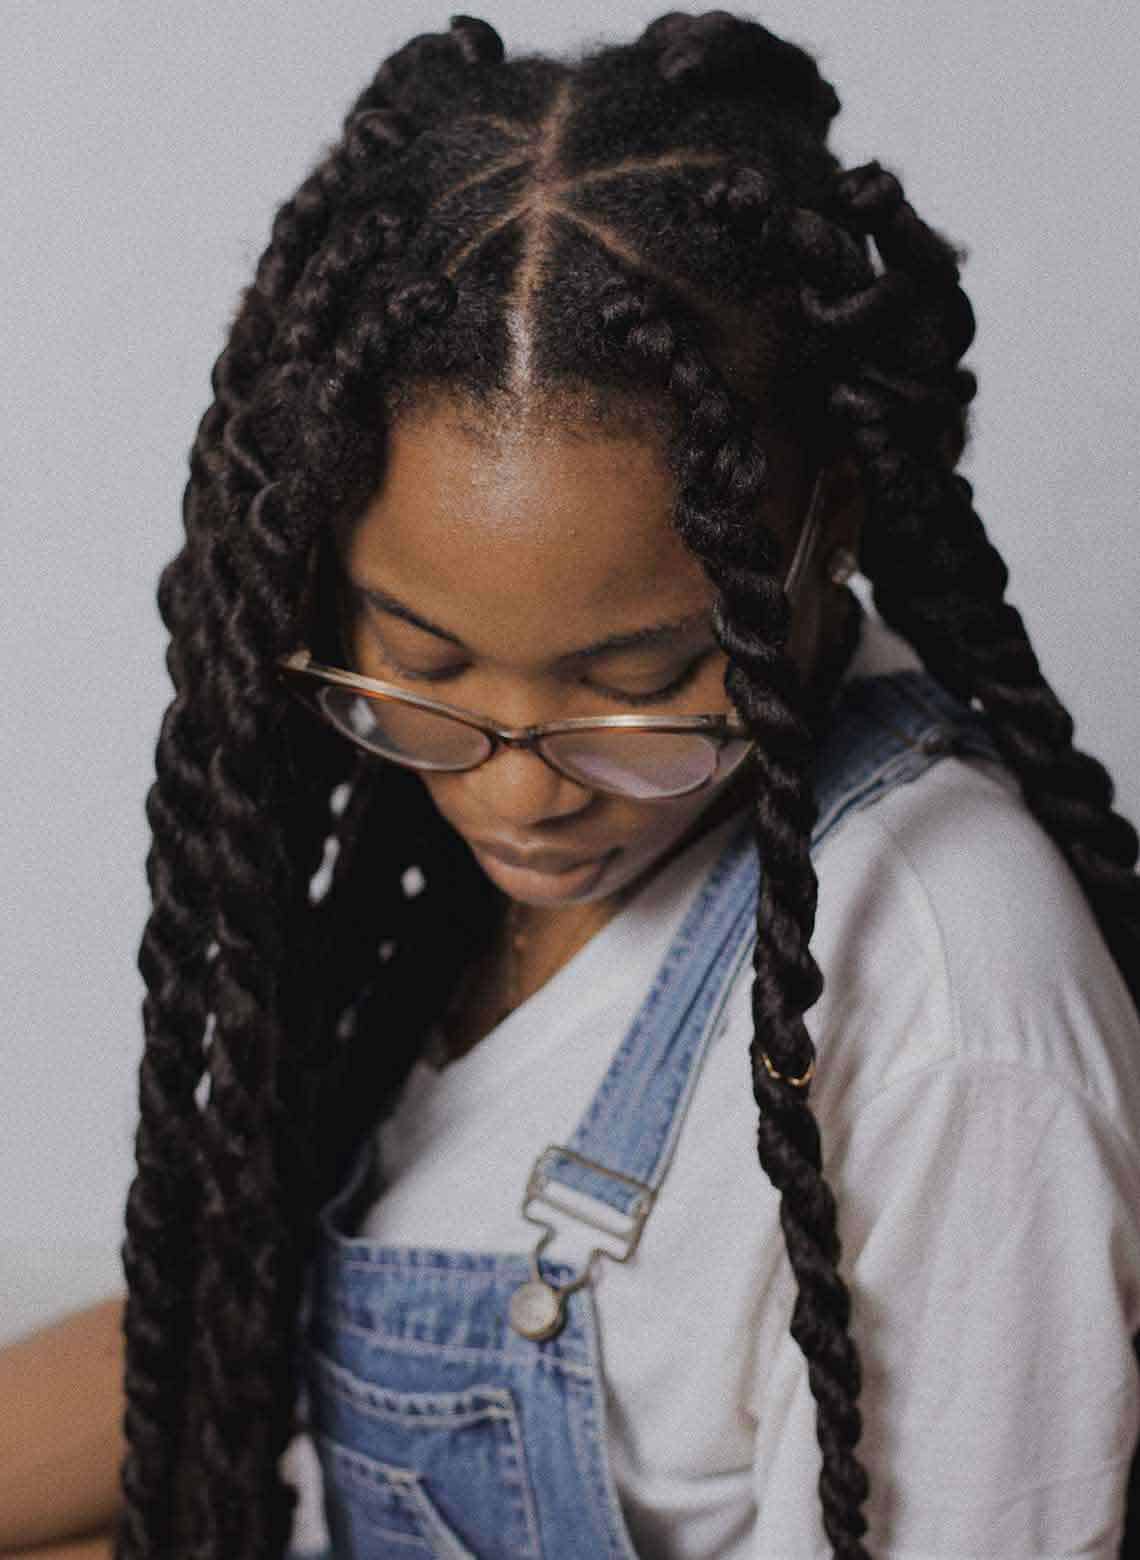 person looking down wearing long havana twists, glasses, white t-shirt and denim overalls